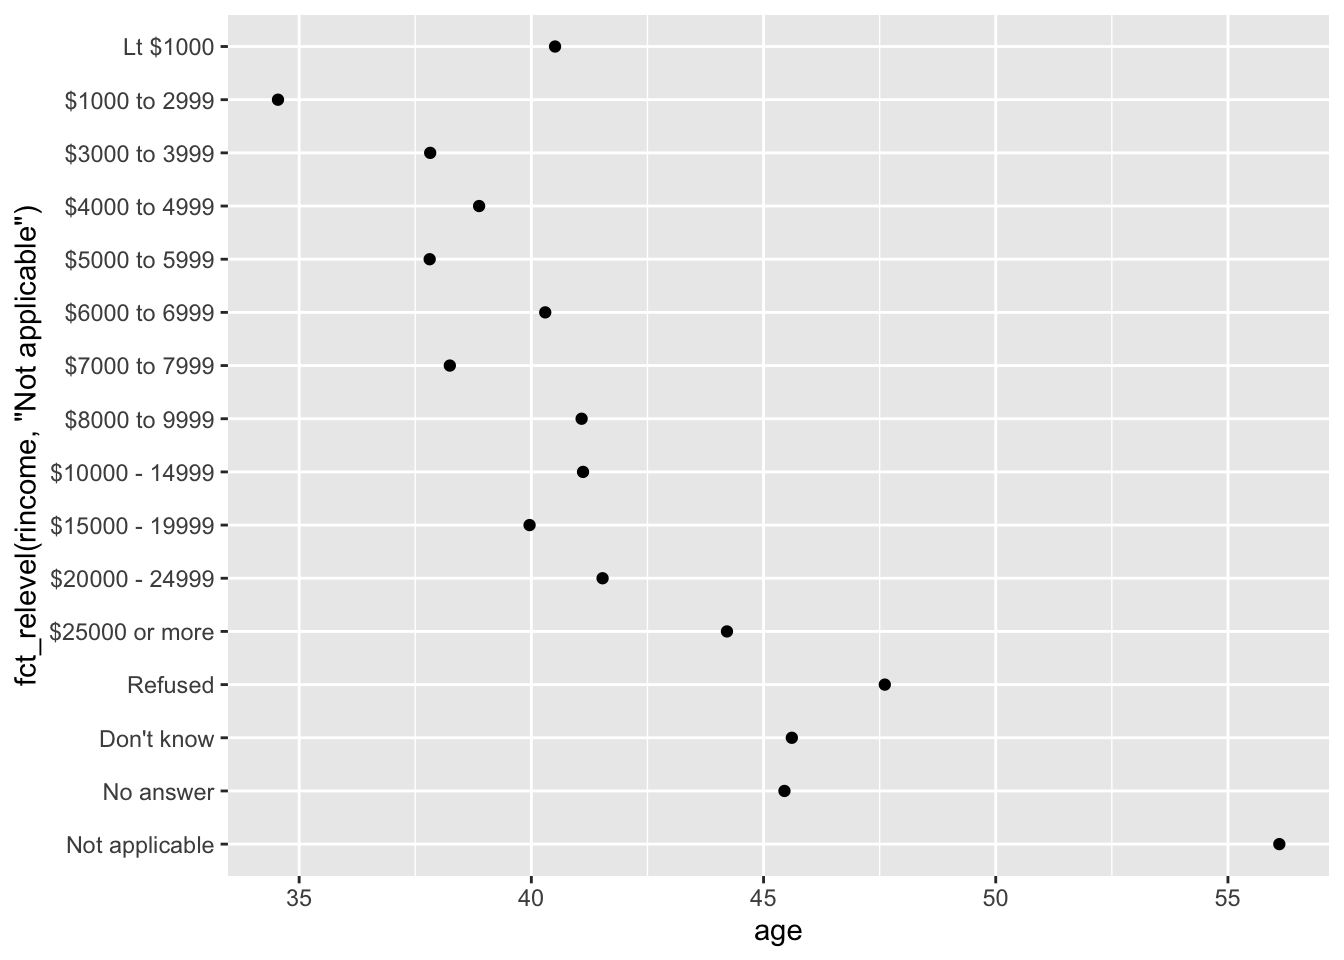 The same scatterplot but now "Not Applicable" is displayed at the bottom of the y-axis. Generally there is a positive association between income and age, and the income band with the highest average age is "Not applicable".